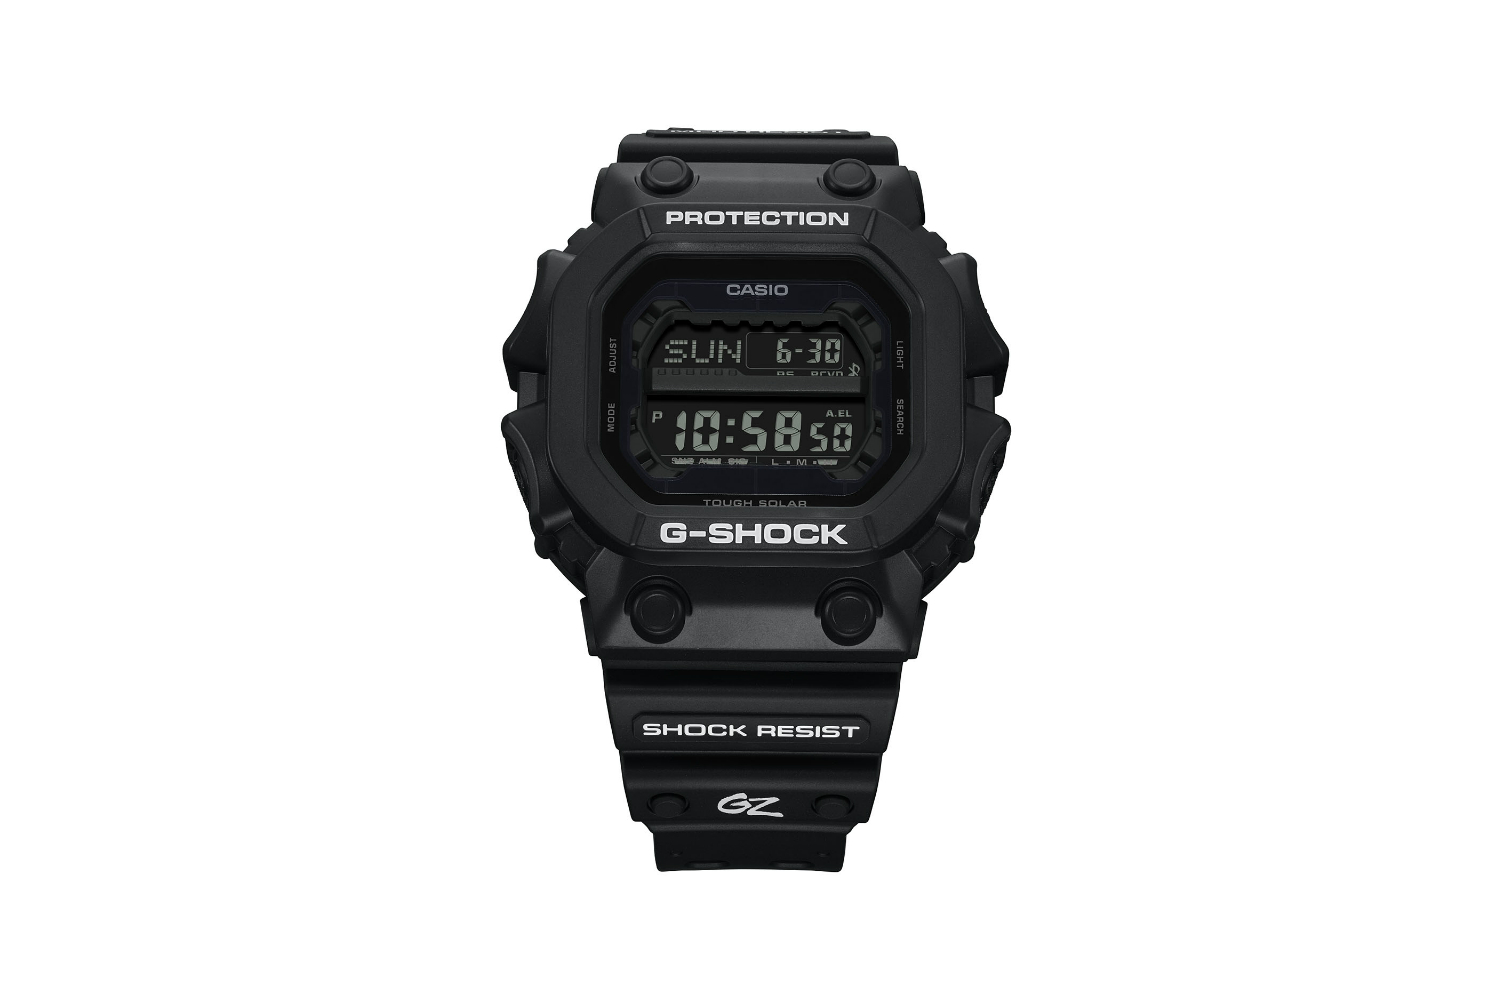 Casio Announces New G-Shock X Gorillaz Watch Collection - The Manual